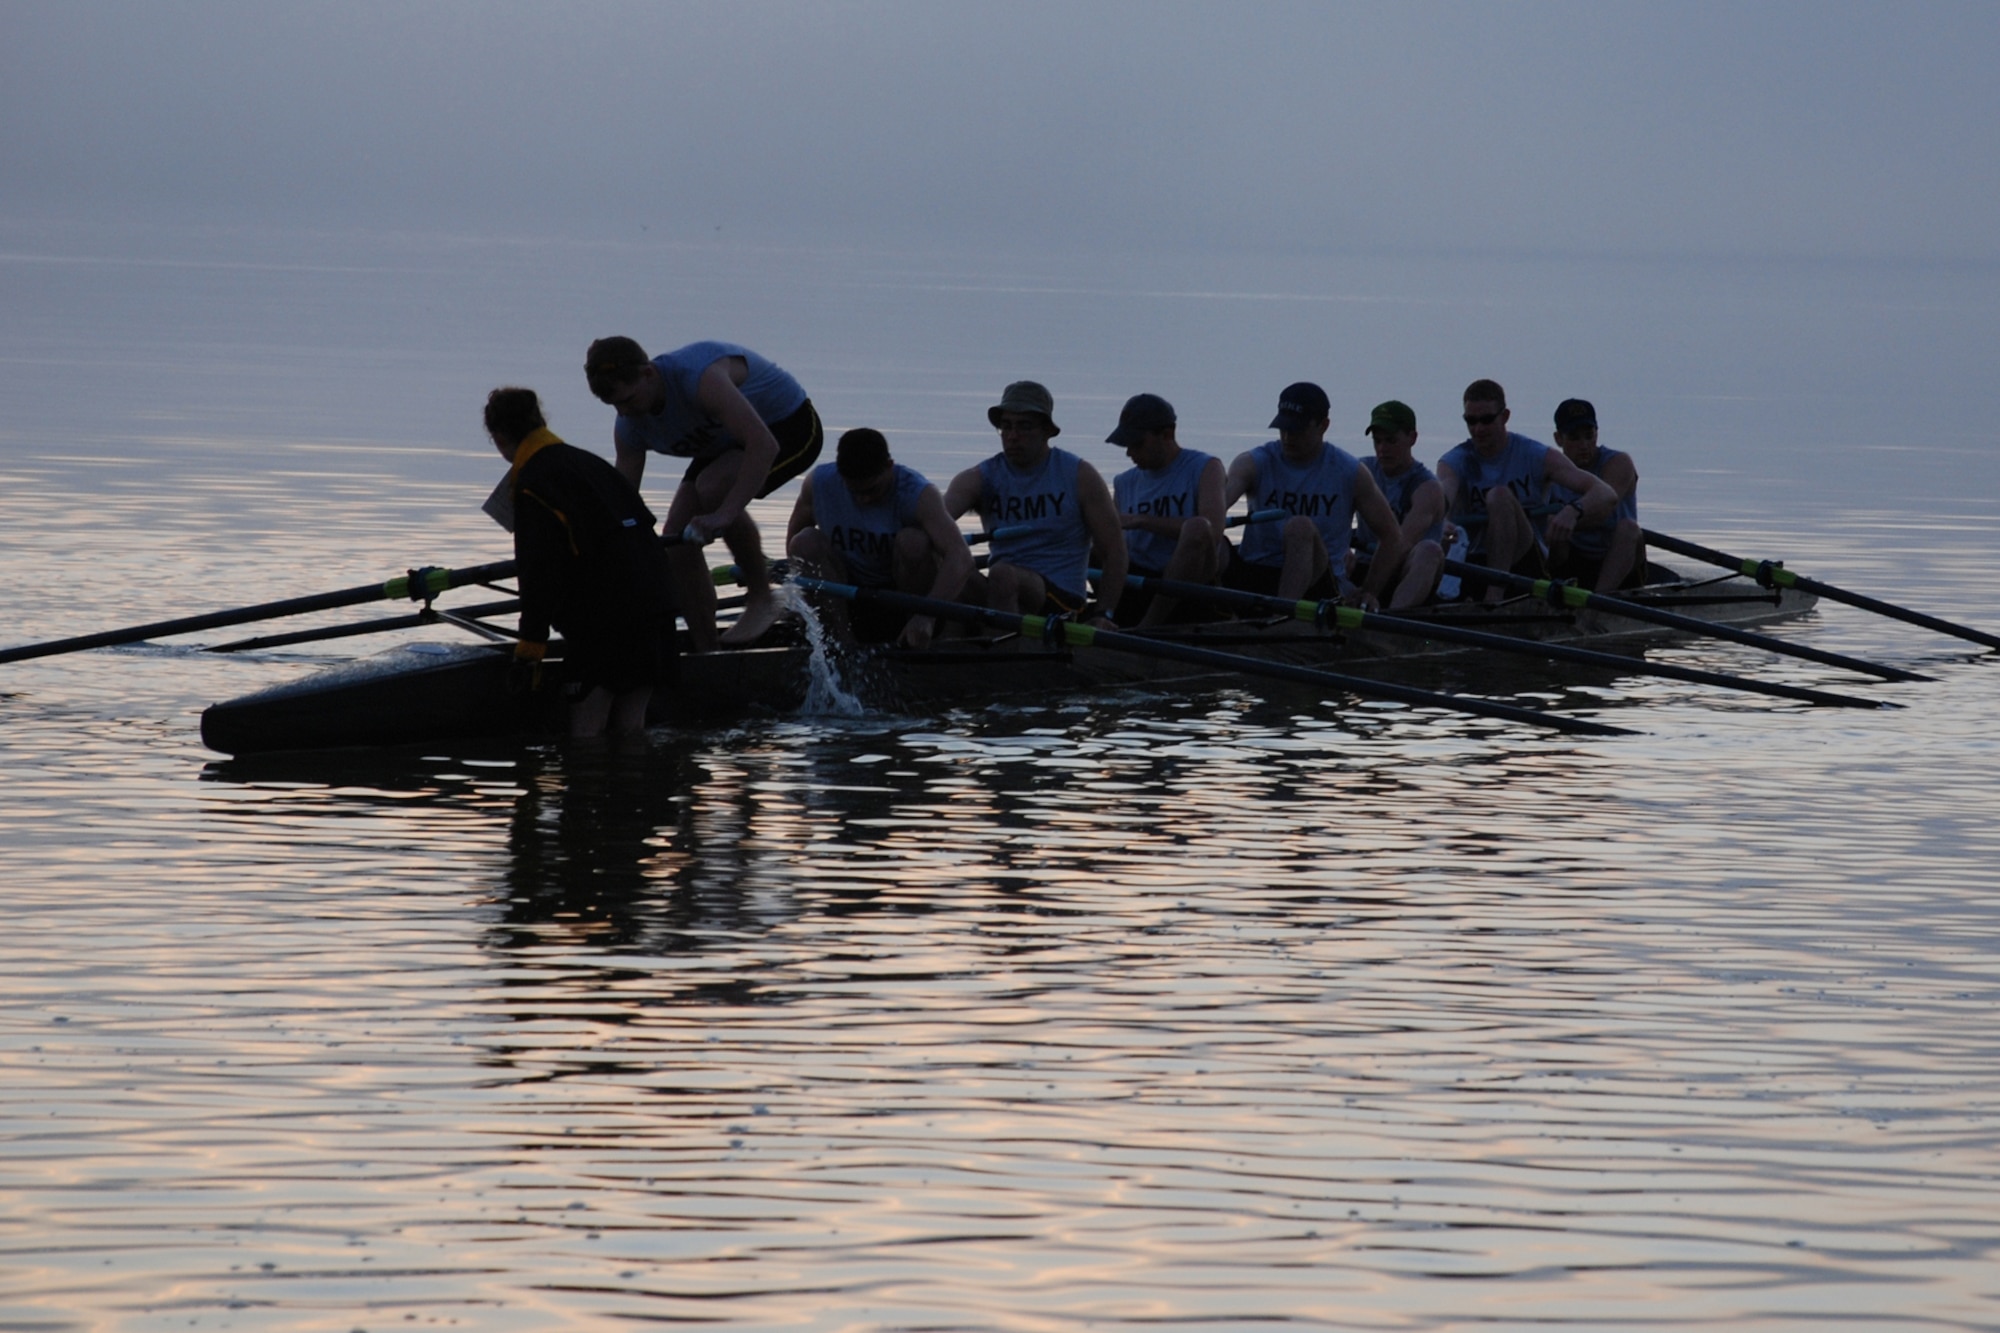 EGLIN AIR FORCE BASE, Fla. -- The fog rolls in over the water as the Eric Munn (senior), U.S. Military Academy Crew Team men's novice squad, climbs in the boat at Postal Point during an early morning workout March 13 in Choctawhatchee Bay. The team is split up into four squads: men's varsity and novice, and women's varsity and novice. The team is here during their spring break to practice in the warmer Florida temperatures. The men's varsity squad was ranked 20th in the nation at the end of last season. (U.S. Air Force photo by Staff Sgt. Mike Meares)